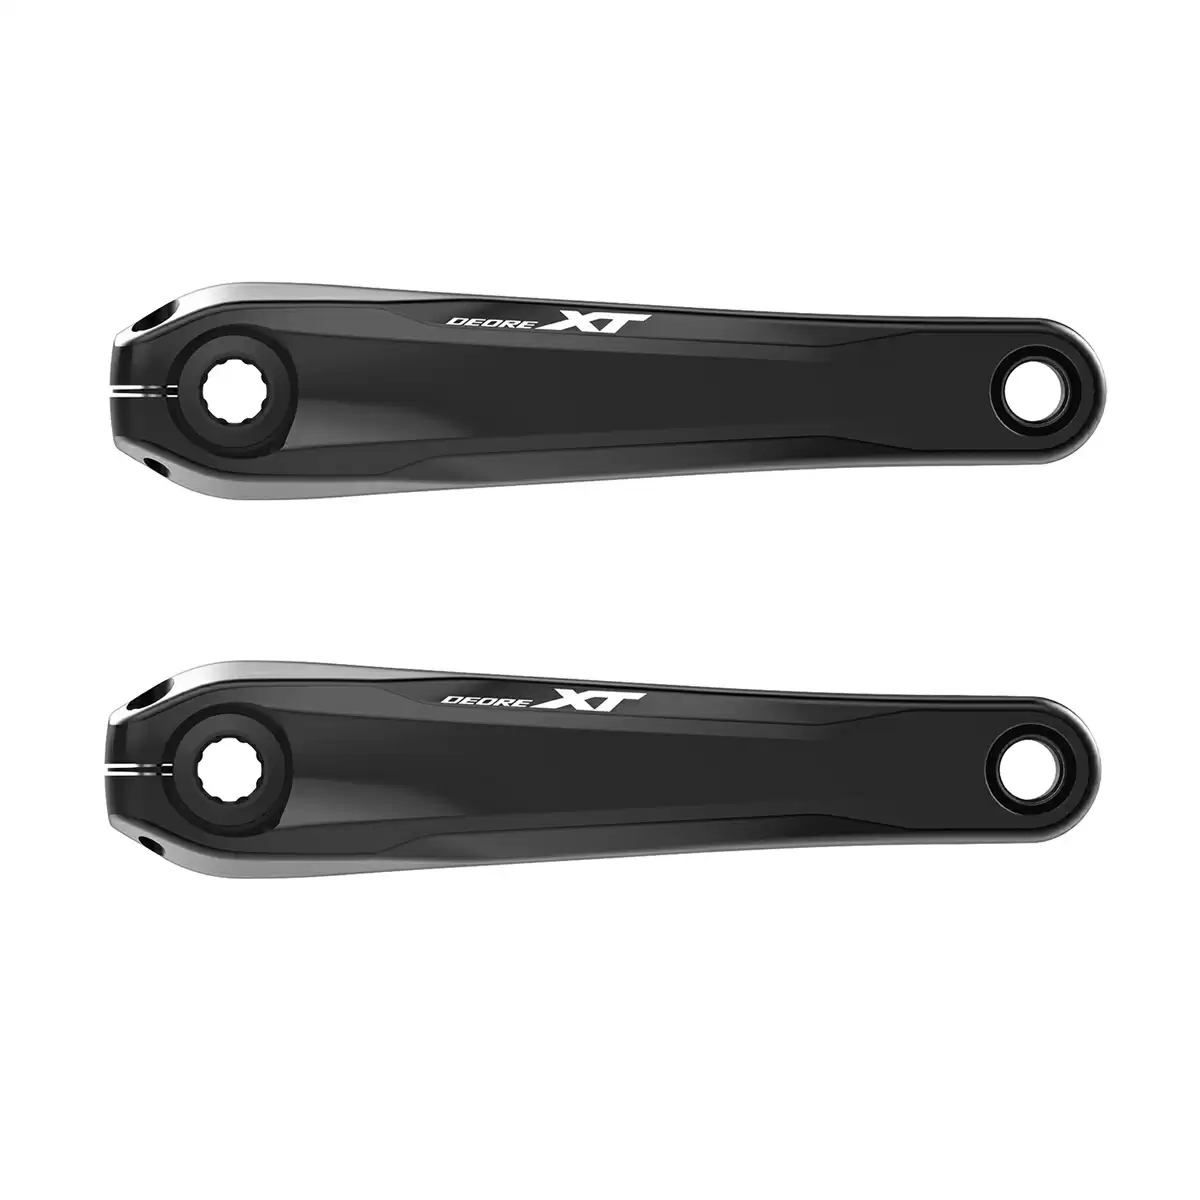 Cranks arms for EP8 engine Hollowtech FC-M8150 160mm - image